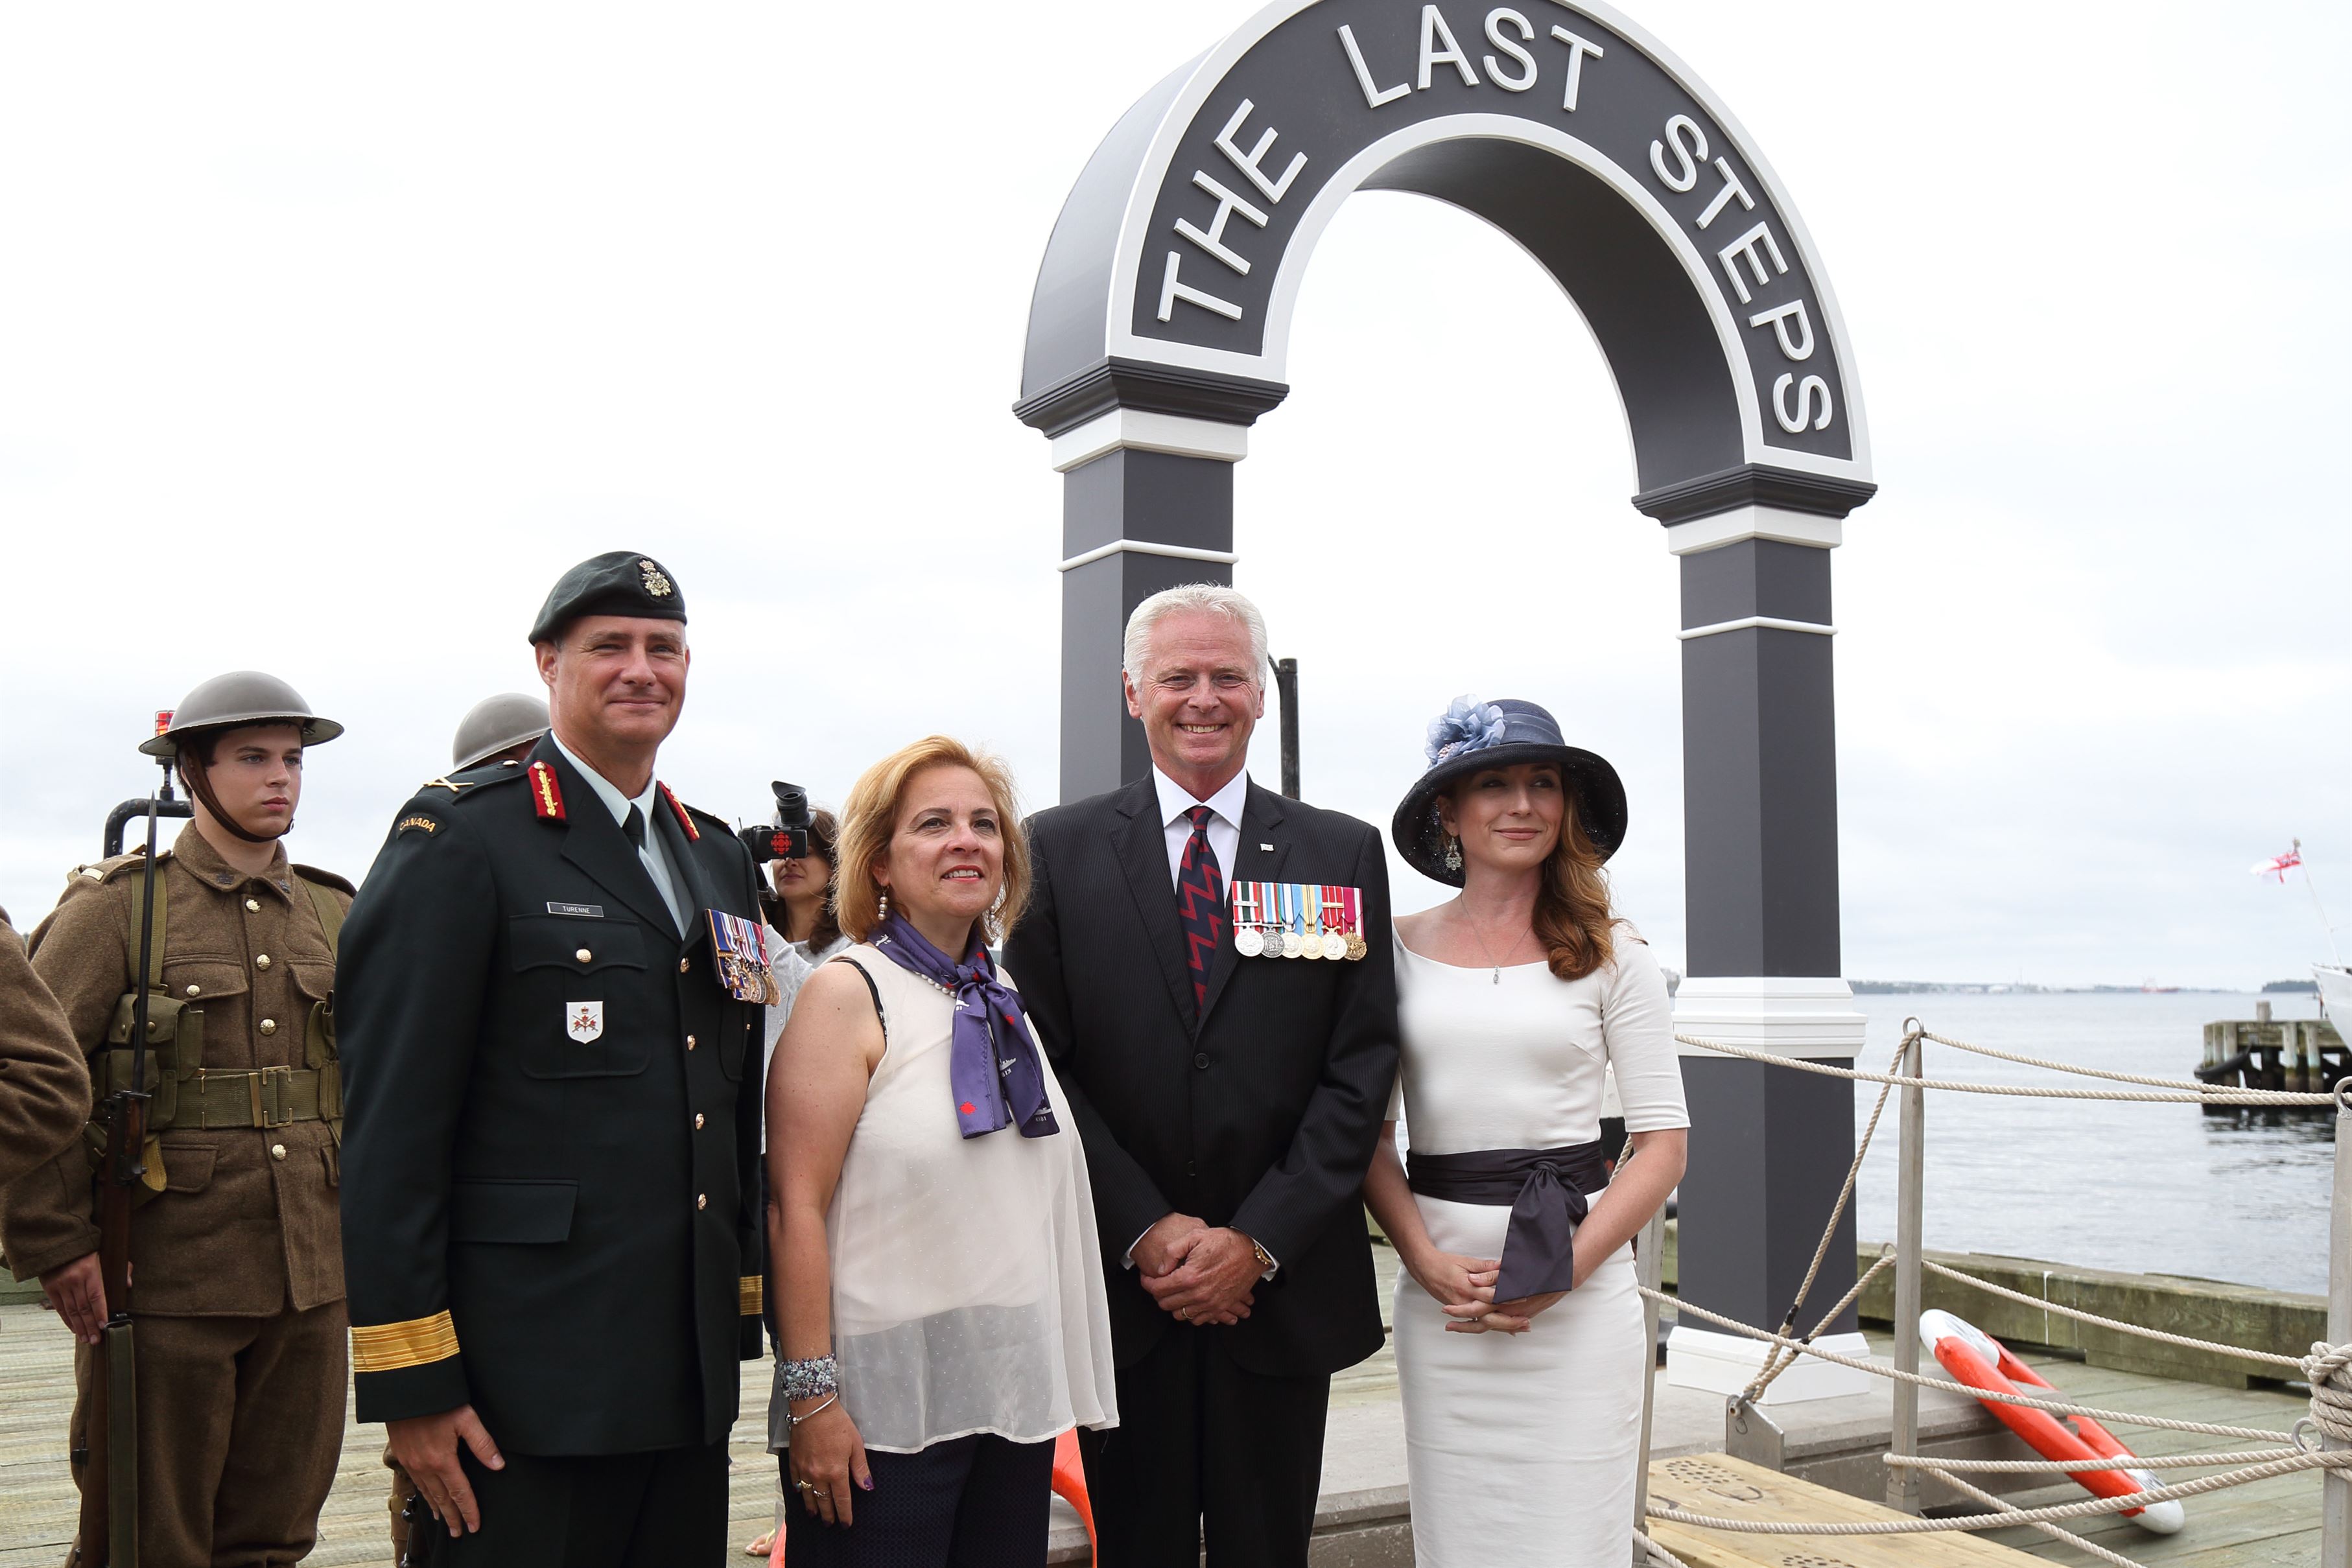 The Commander of 5th Canadian Division, Brigadier-General Carl Turenne, The NS Minister of Immigration, Lena Diab. Project Co-Chairs, Major (ret) Ken Hynes and Ms. Corinne MacLellan